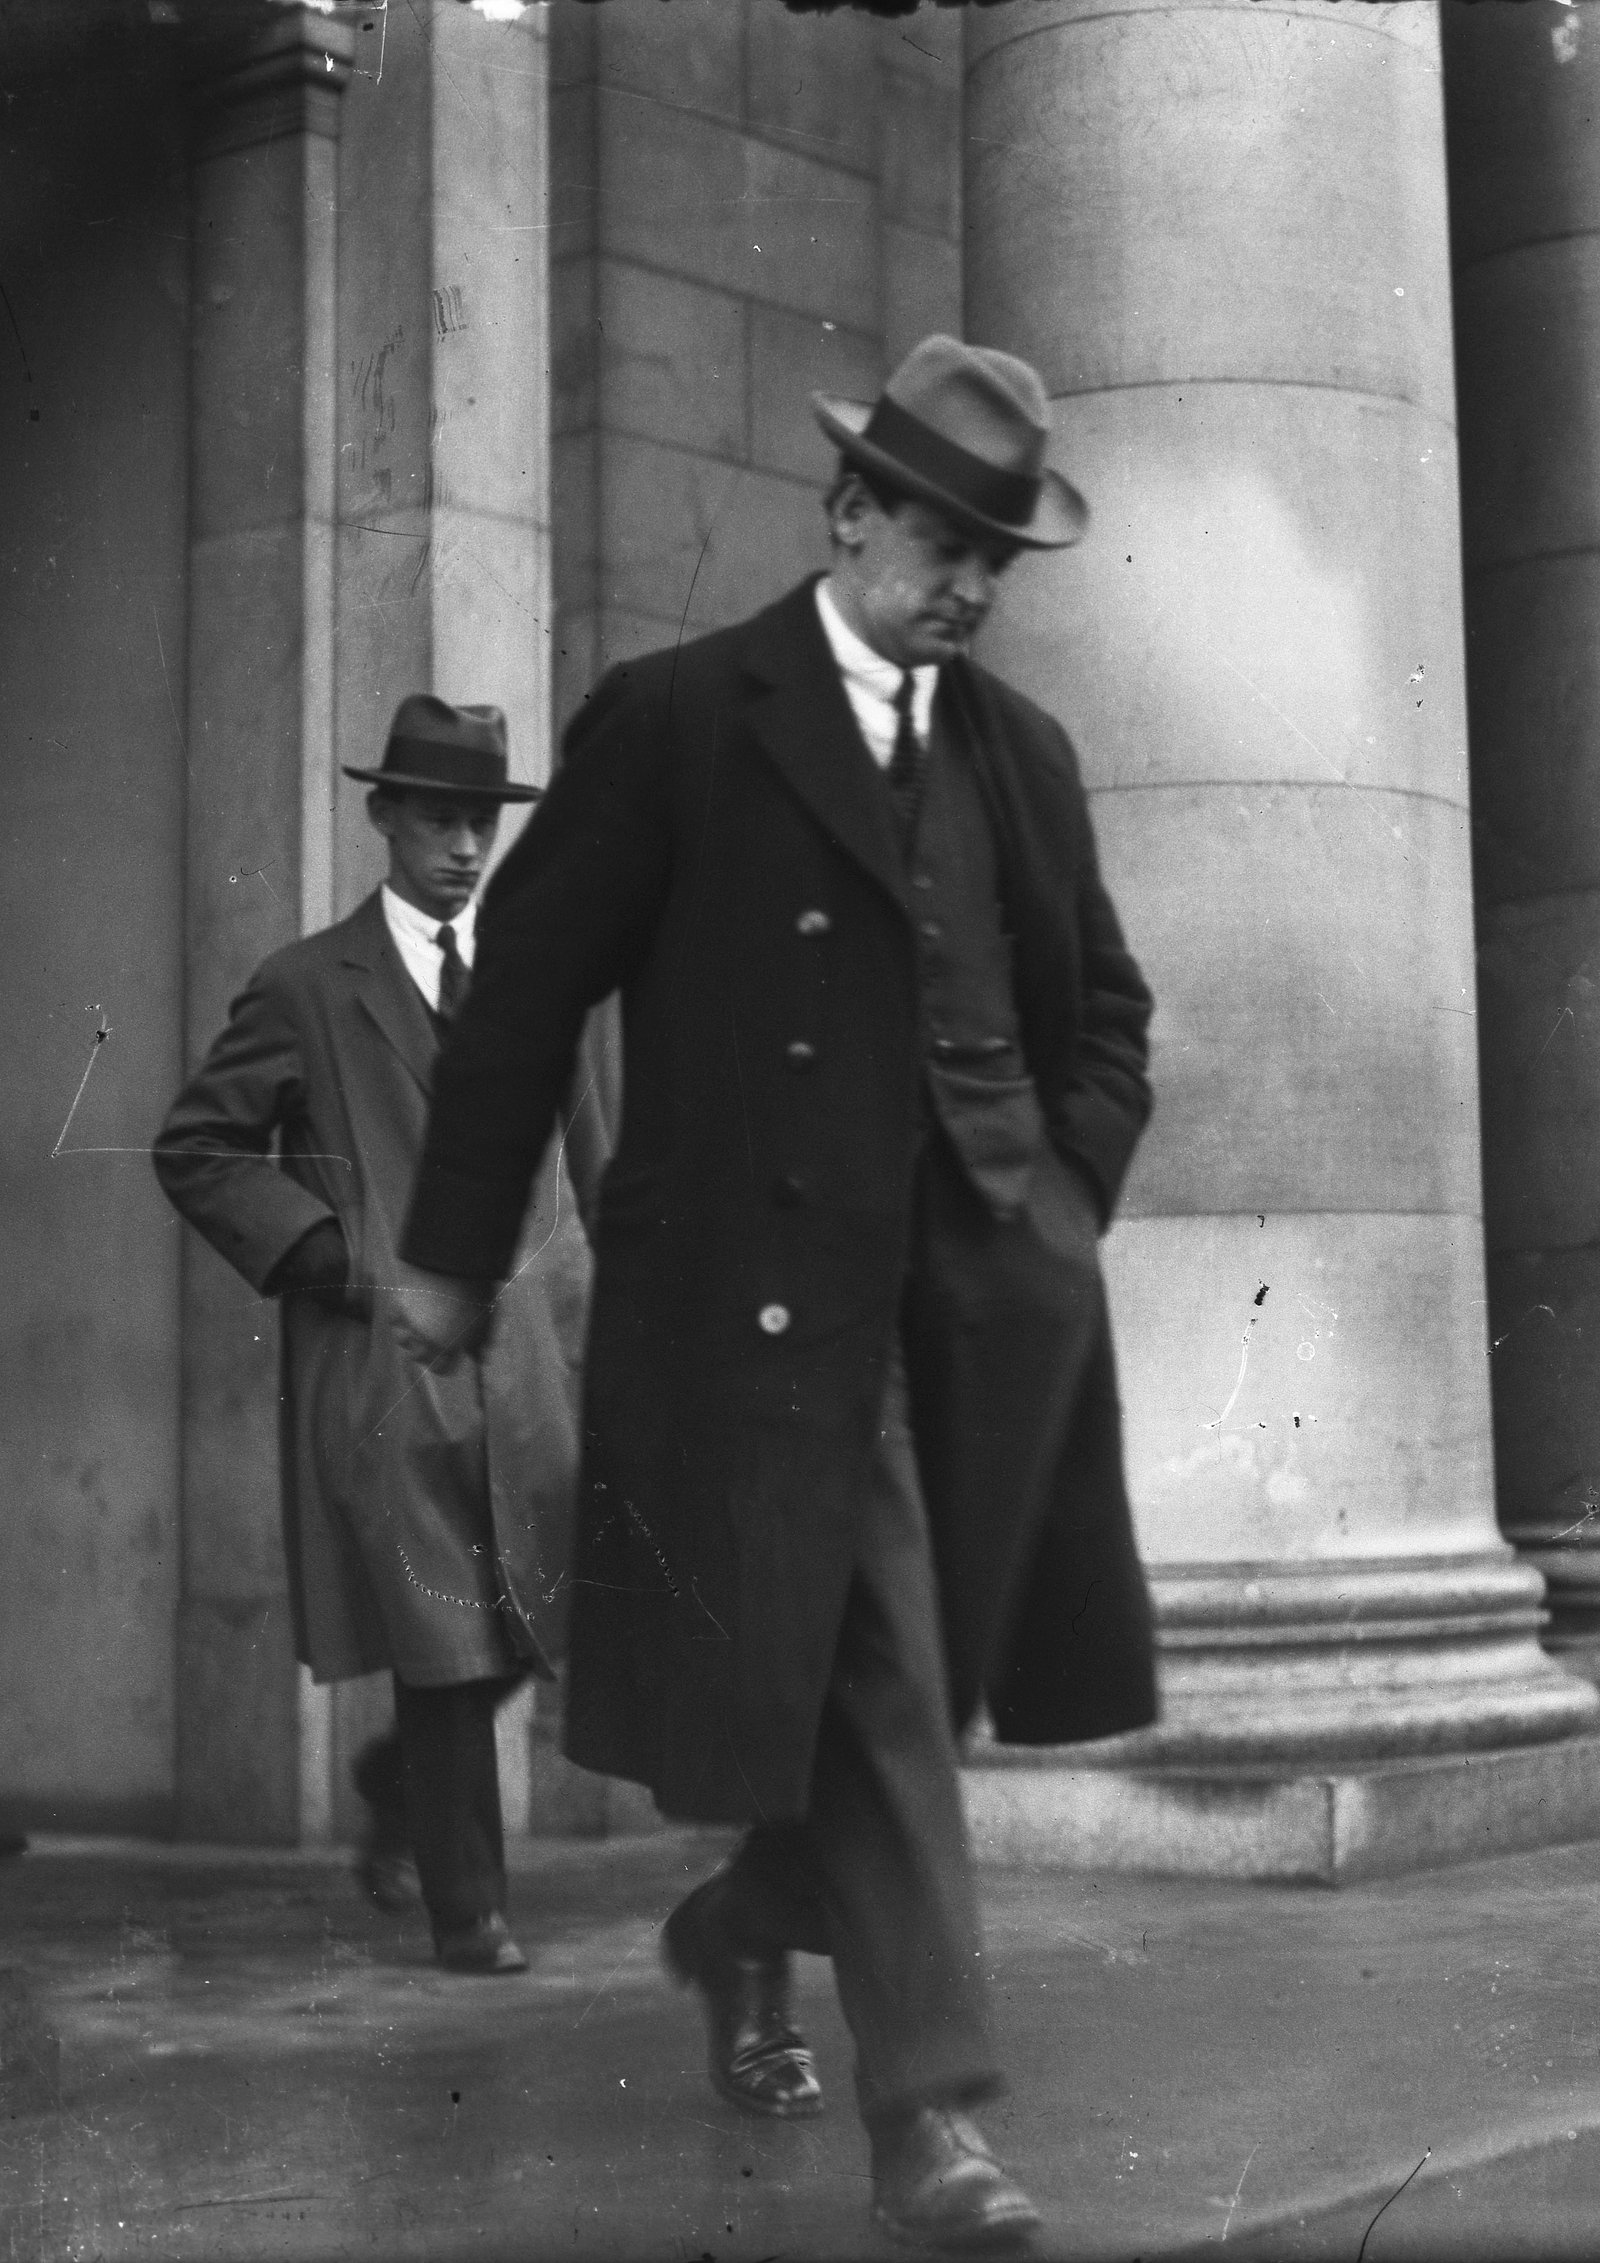 Image - 'The Treaty will almost certainly be beaten'. A pensive Michael Collins leaving the building during a break in proceedings. Credit: Getty Images